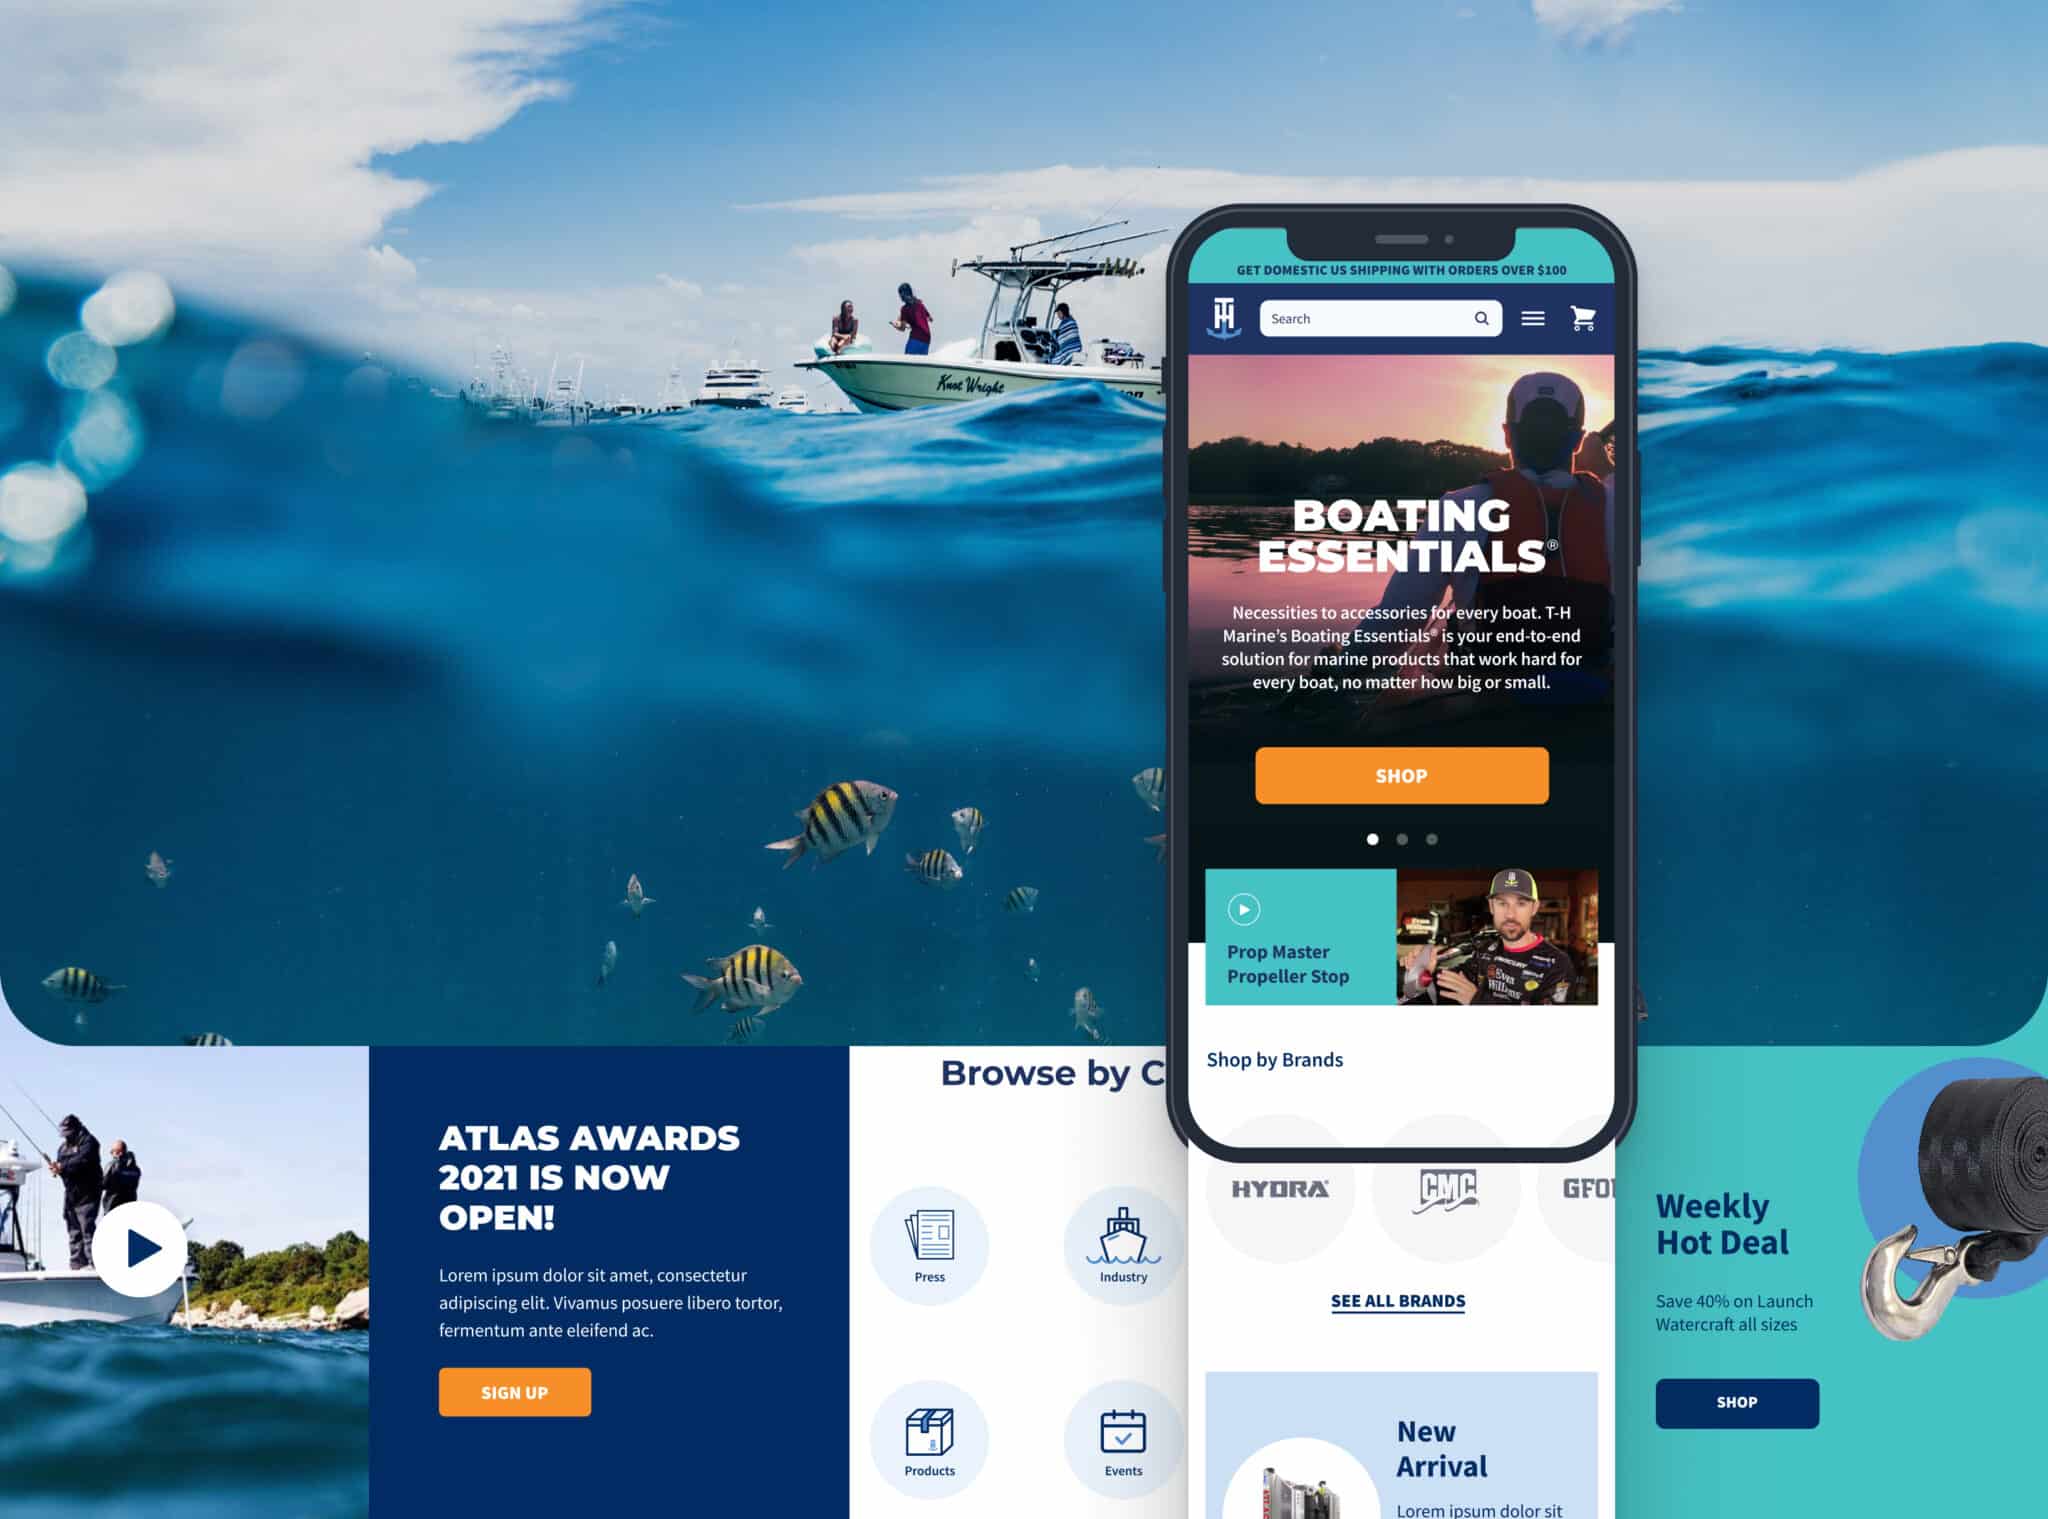 Image of a boating website interface. The background shows people on a boat and fish swimming underwater. The foreground includes a mobile screen displaying a "Boating Essentials" section with options to shop from T-H Marine. Various website sections are below, reimagining the Sea to Sea experience.